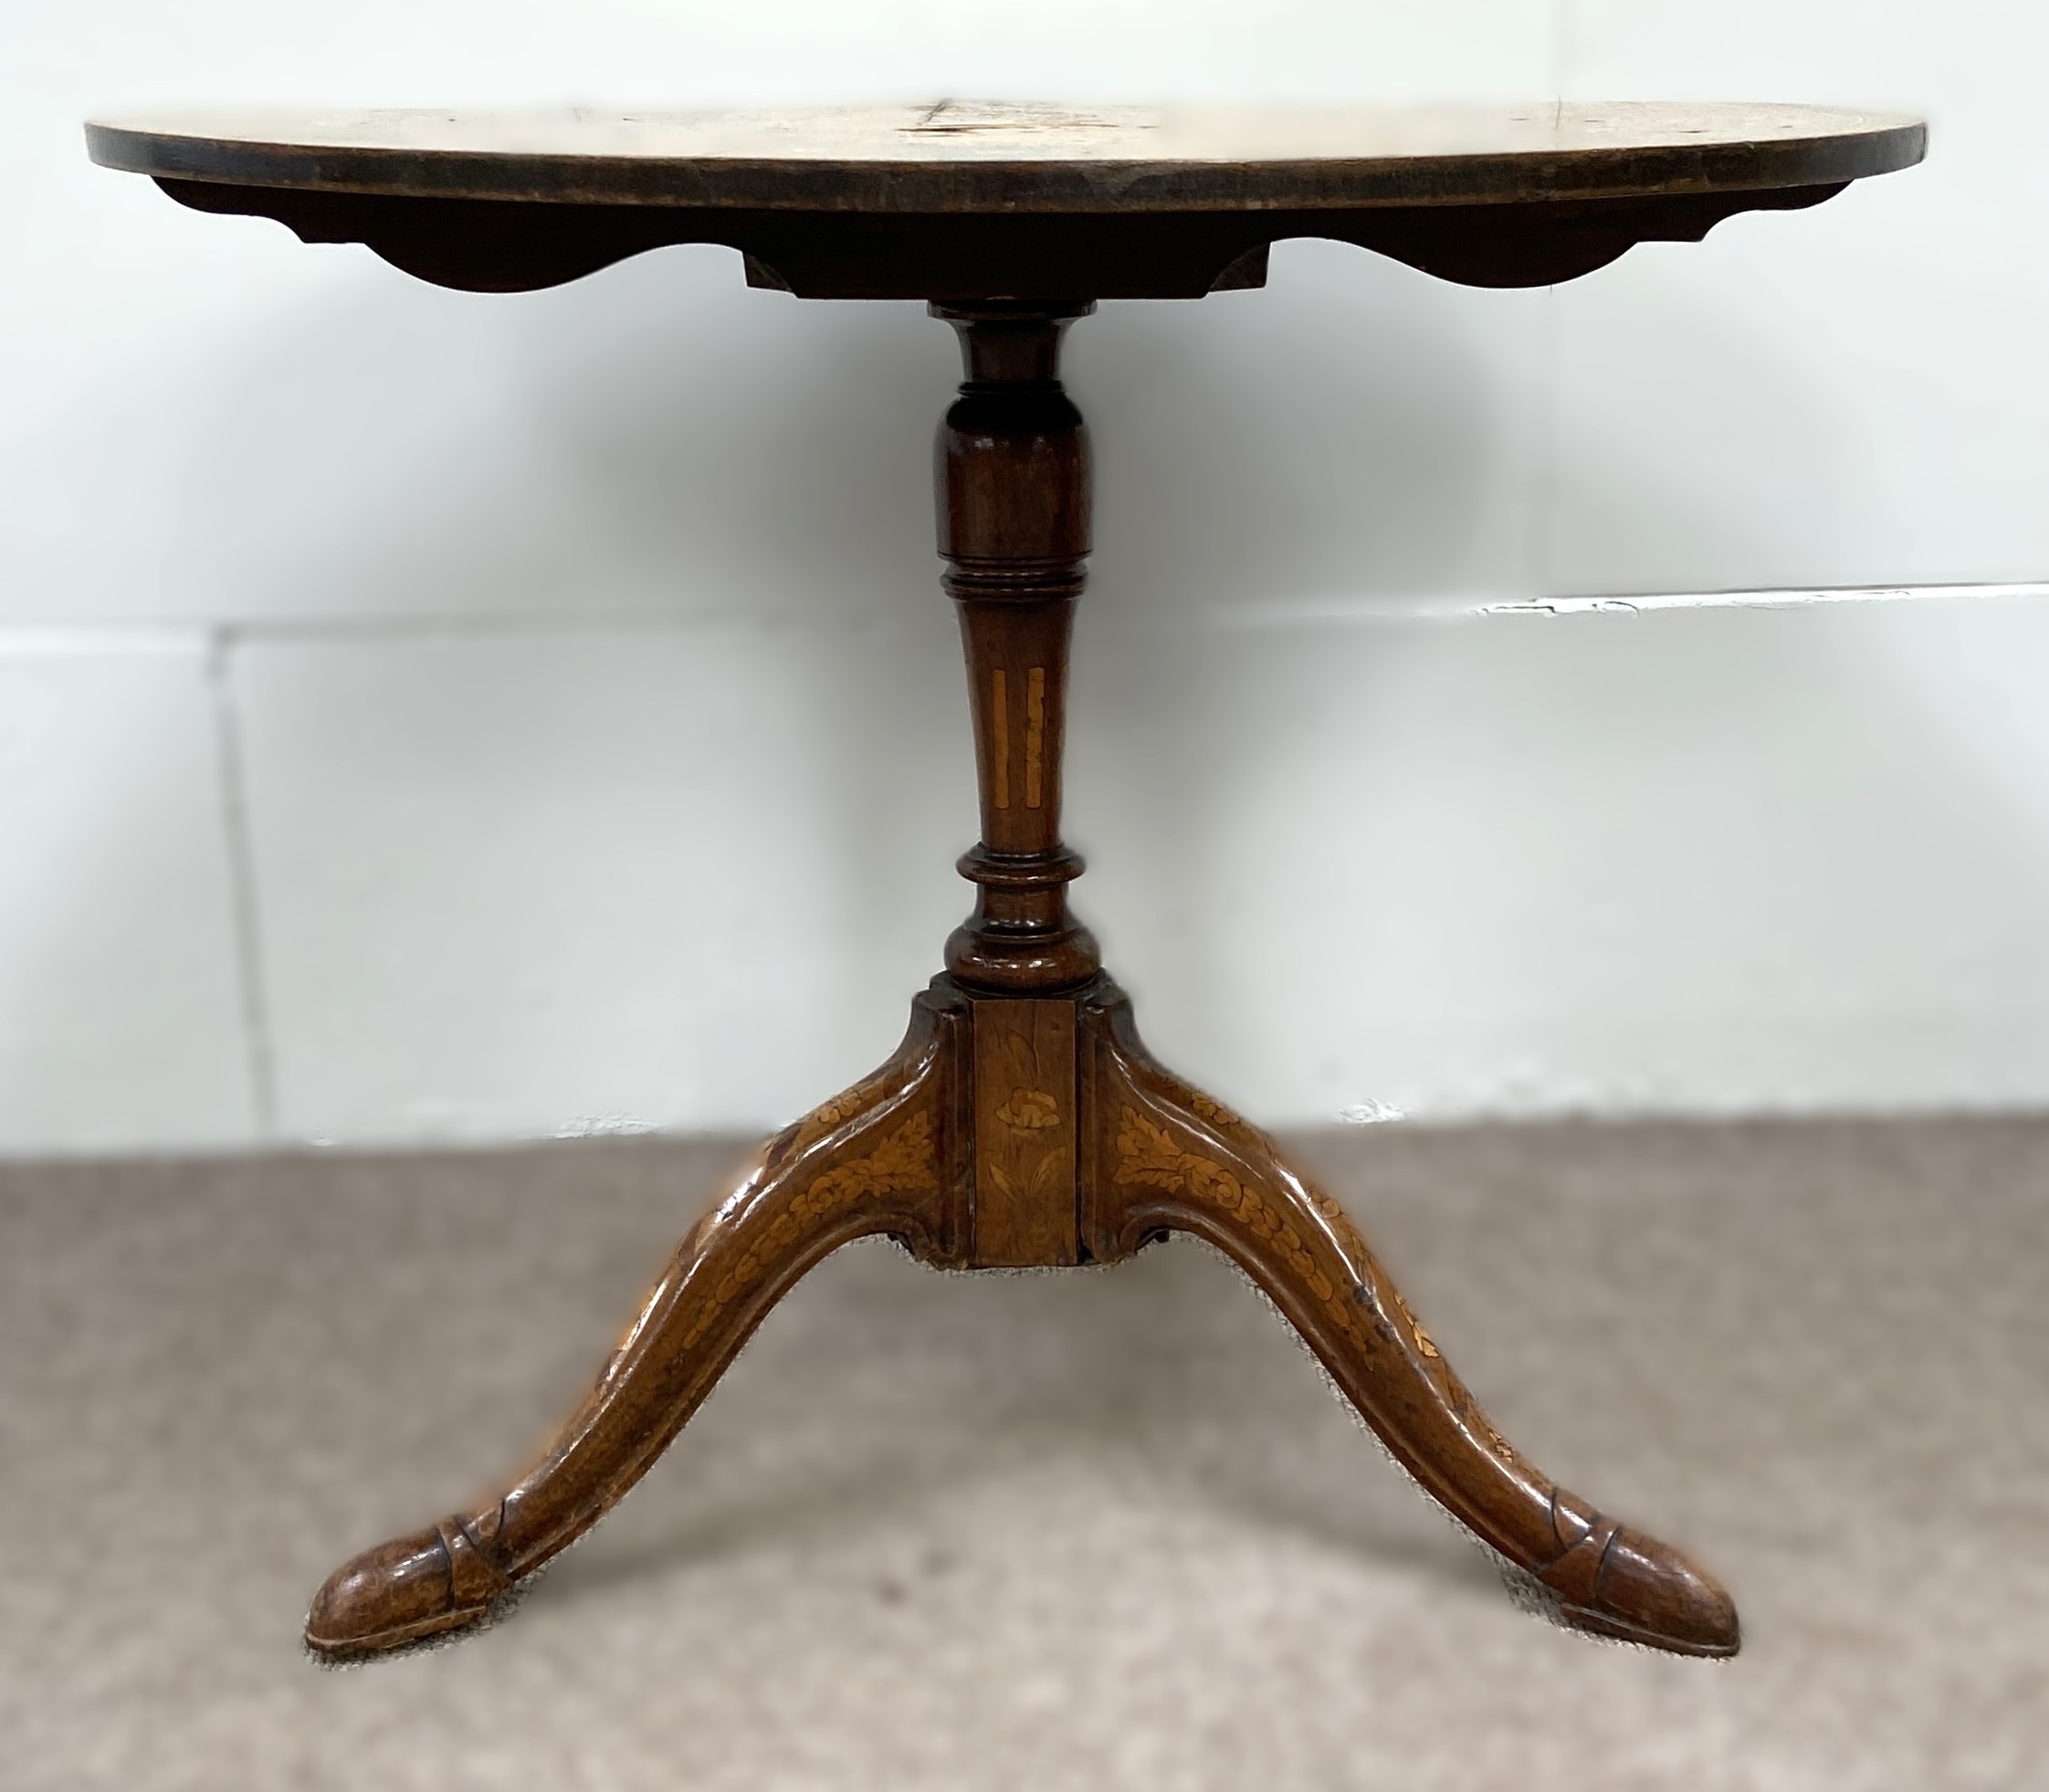 An Anglo-Dutch inlaid circular wine table, late 18th century and later, with a tilting coromandel - Bild 2 aus 6